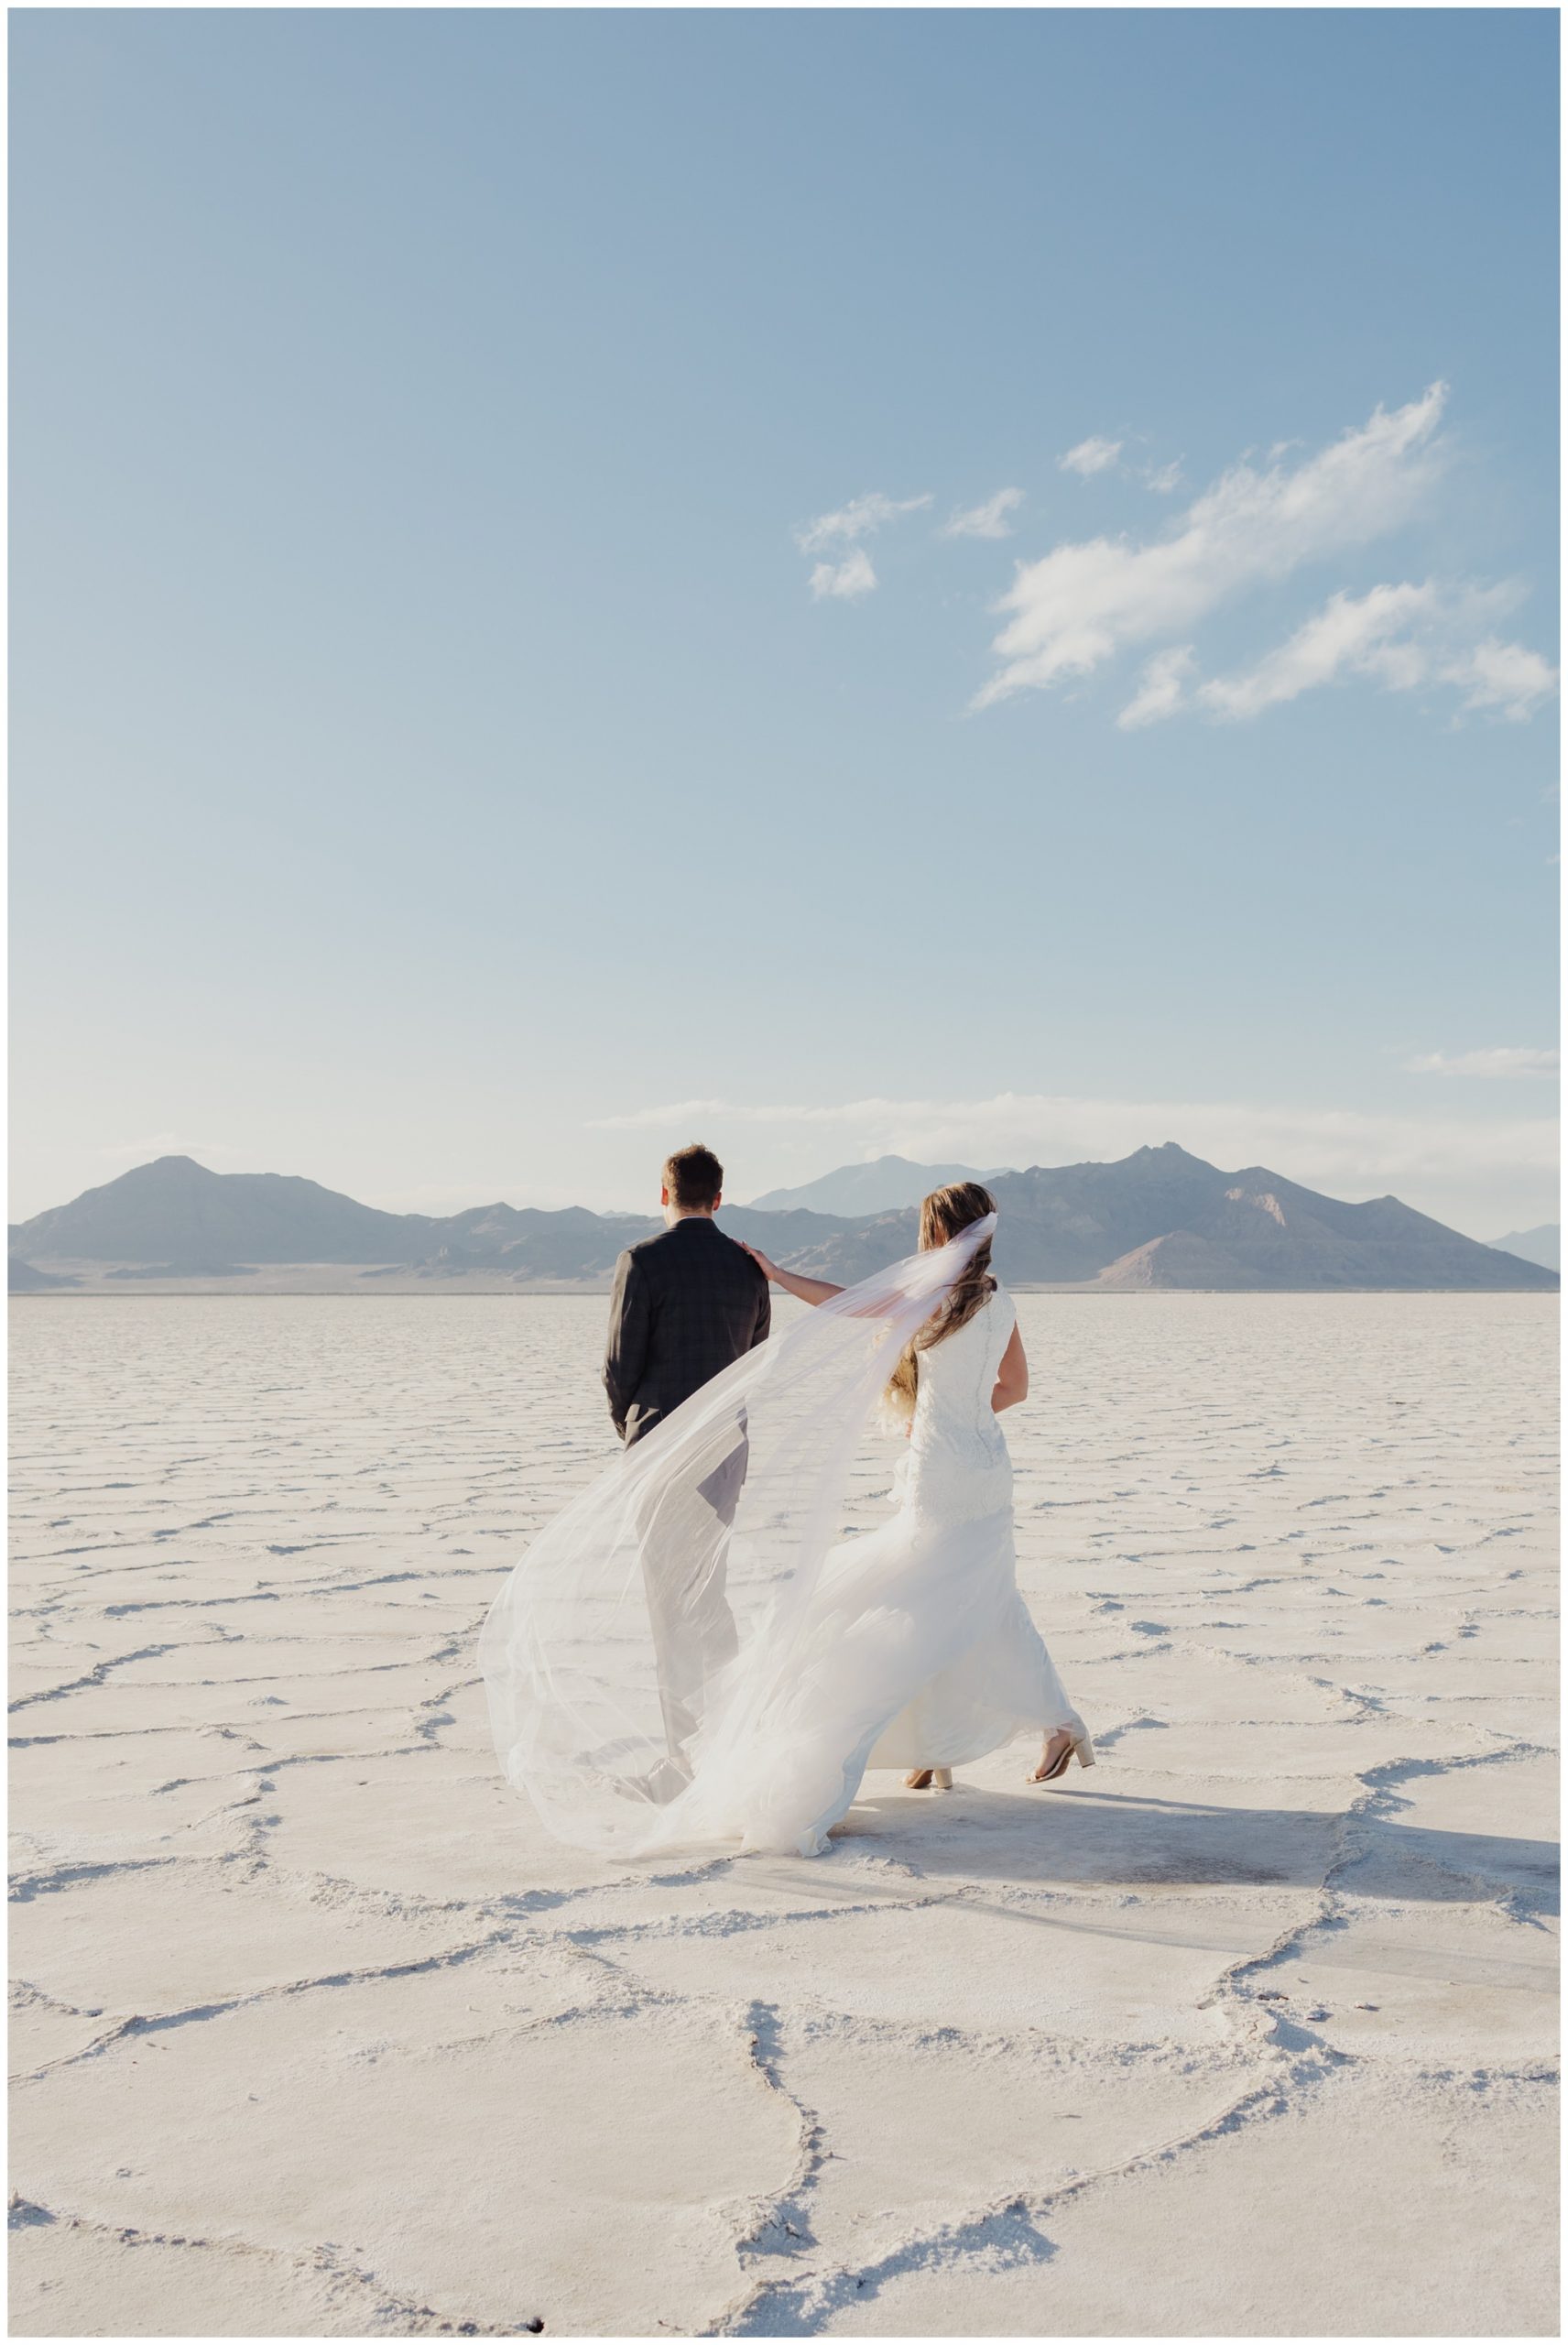 Groom getting a first look of his bride at the Salt Flats in Utah